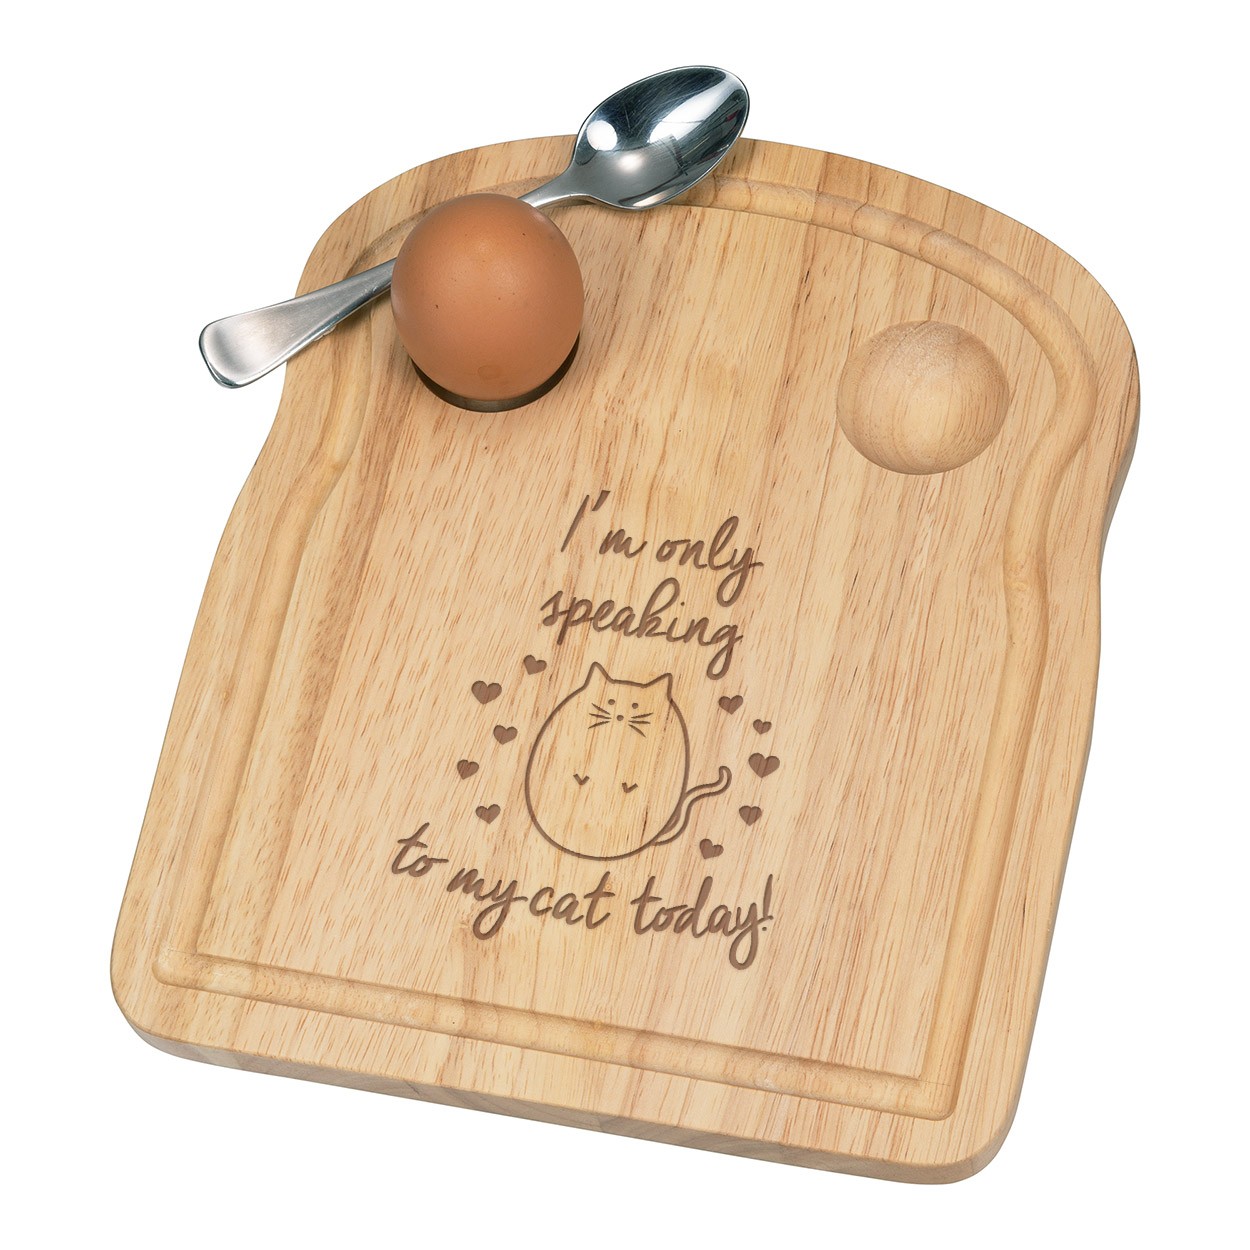 I'm Only Speaking To My Cat Today Breakfast Dippy Egg Cup Board Wooden